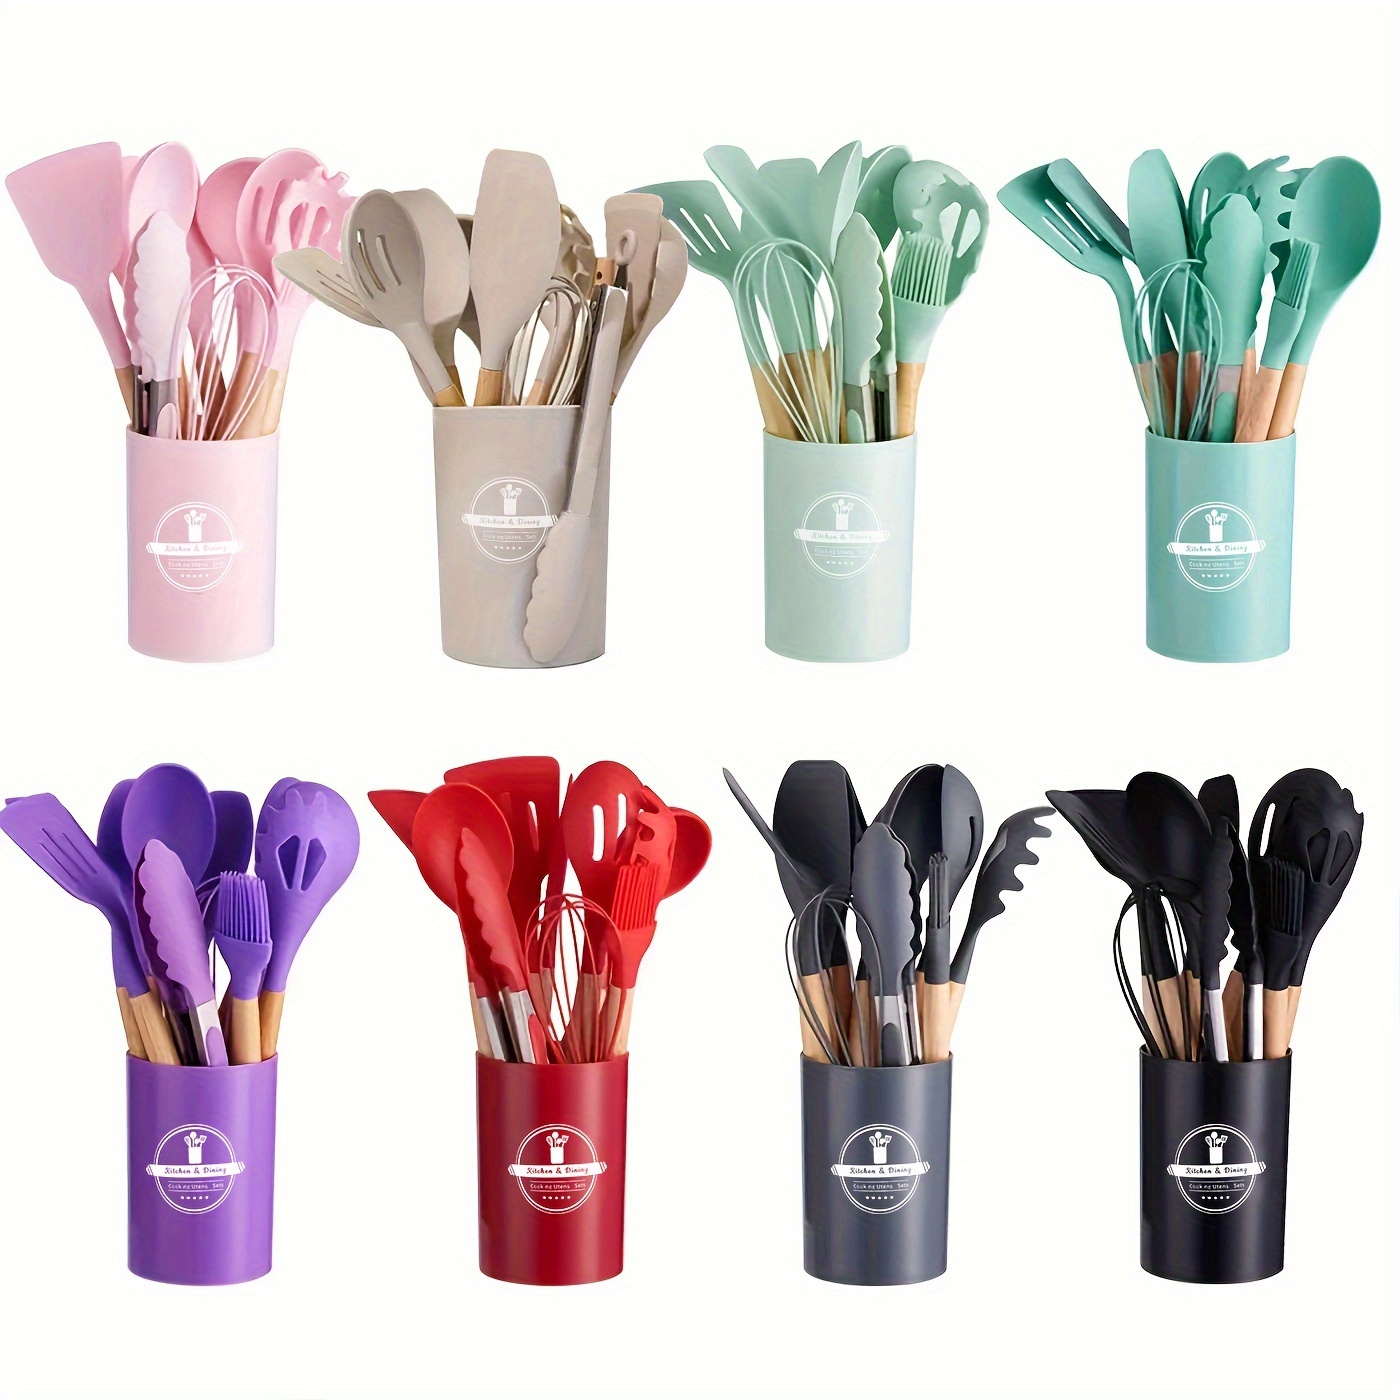 Top Seller Silicone Cooking Utensils 12PCS Kitchen Tools